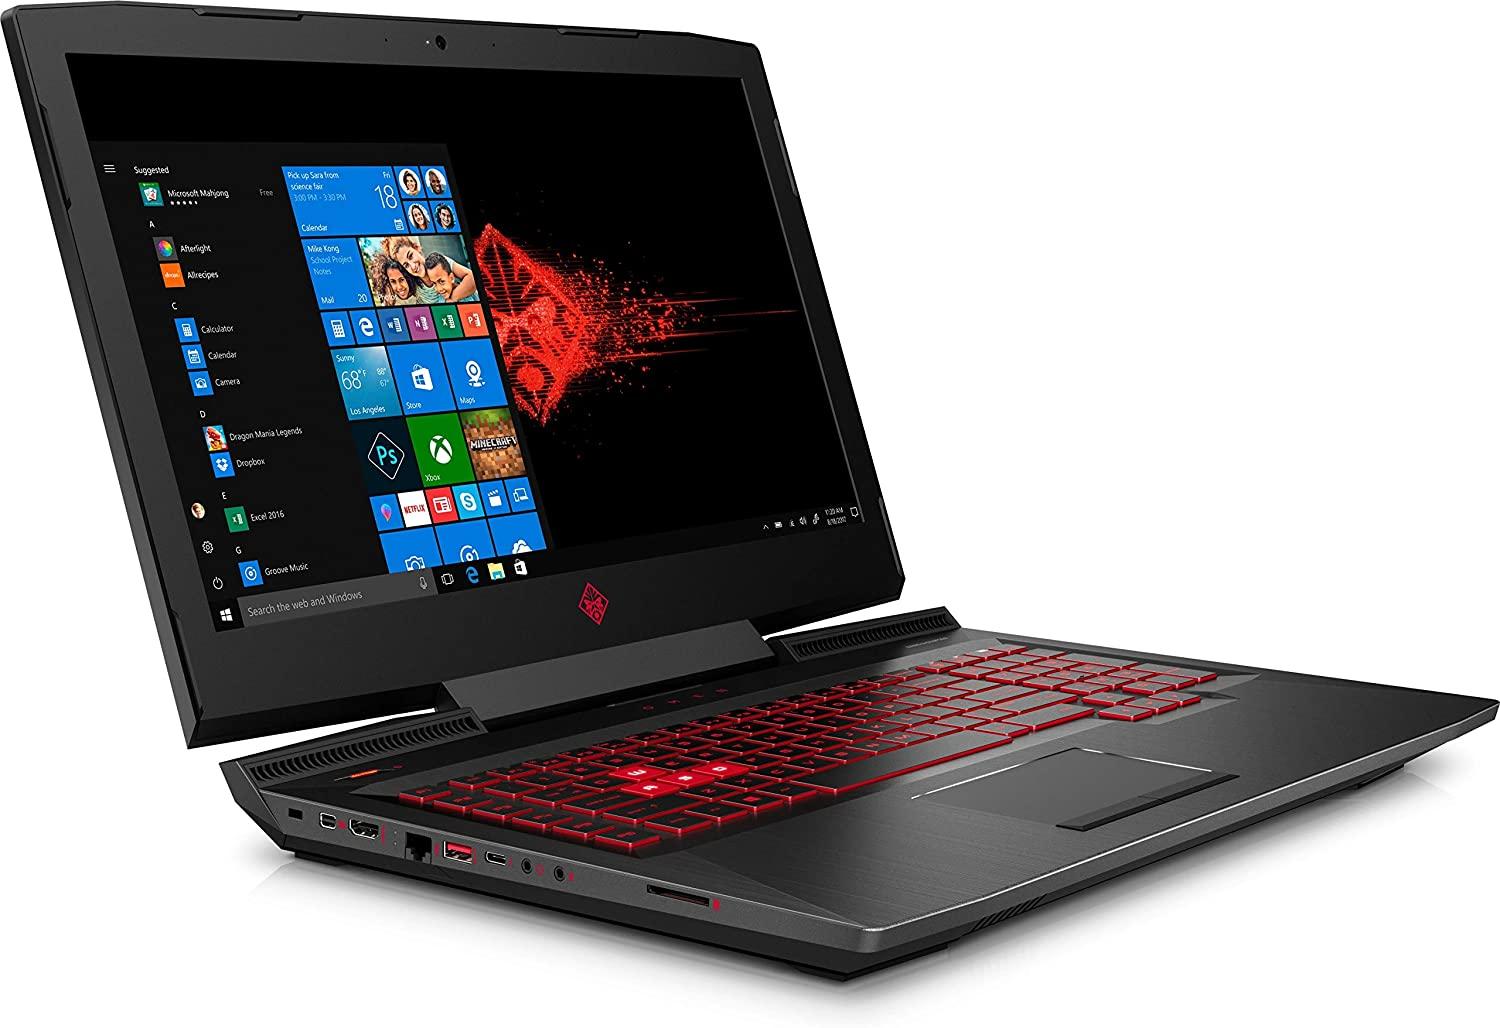 HP Omen Laptop 17t-ck000 i7 16GB 512GB RTX 3070 Notebook Laptop for $1664.99 Shipped